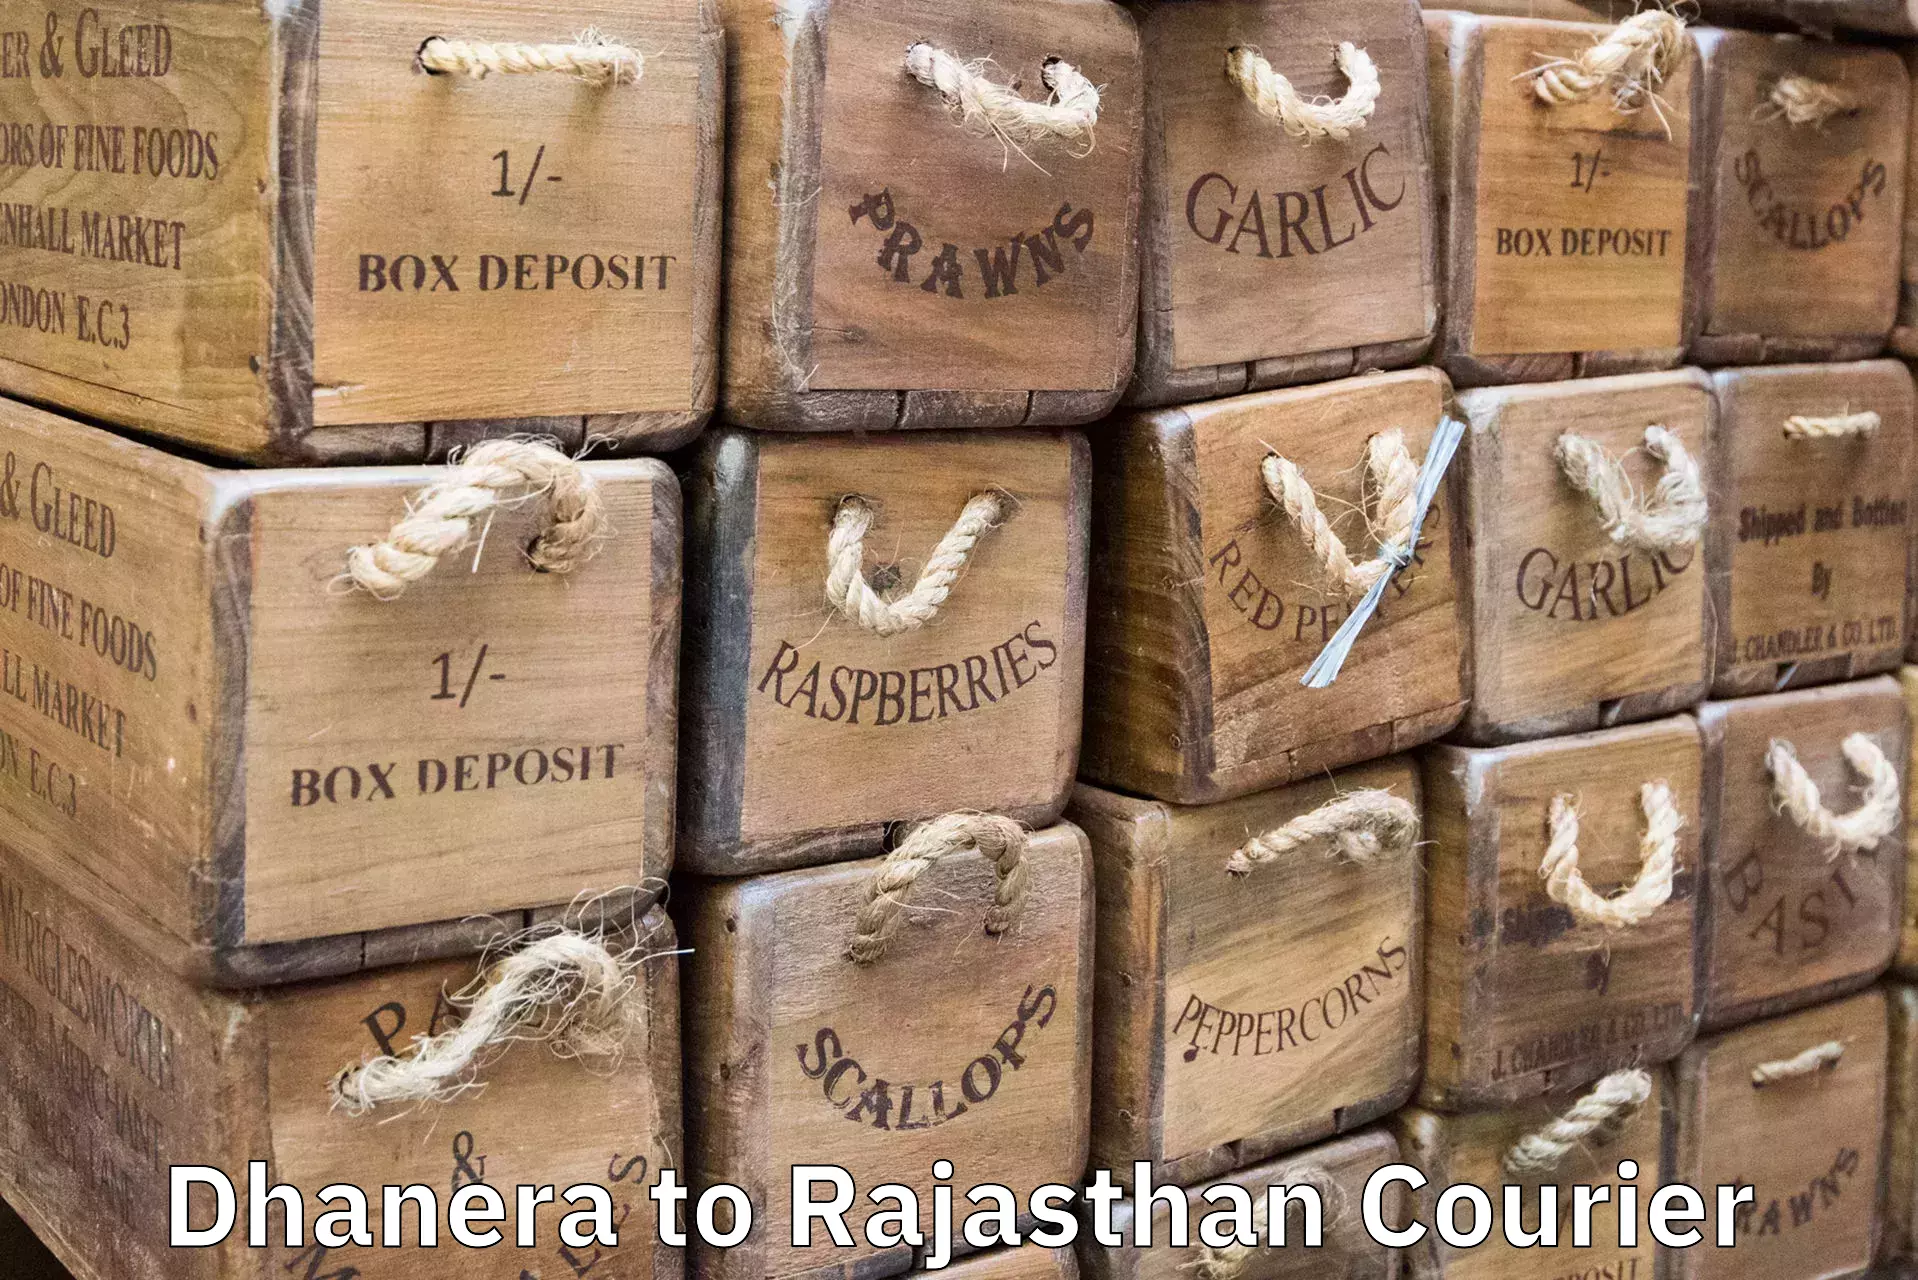 Luggage transport consultancy Dhanera to Rajasthan